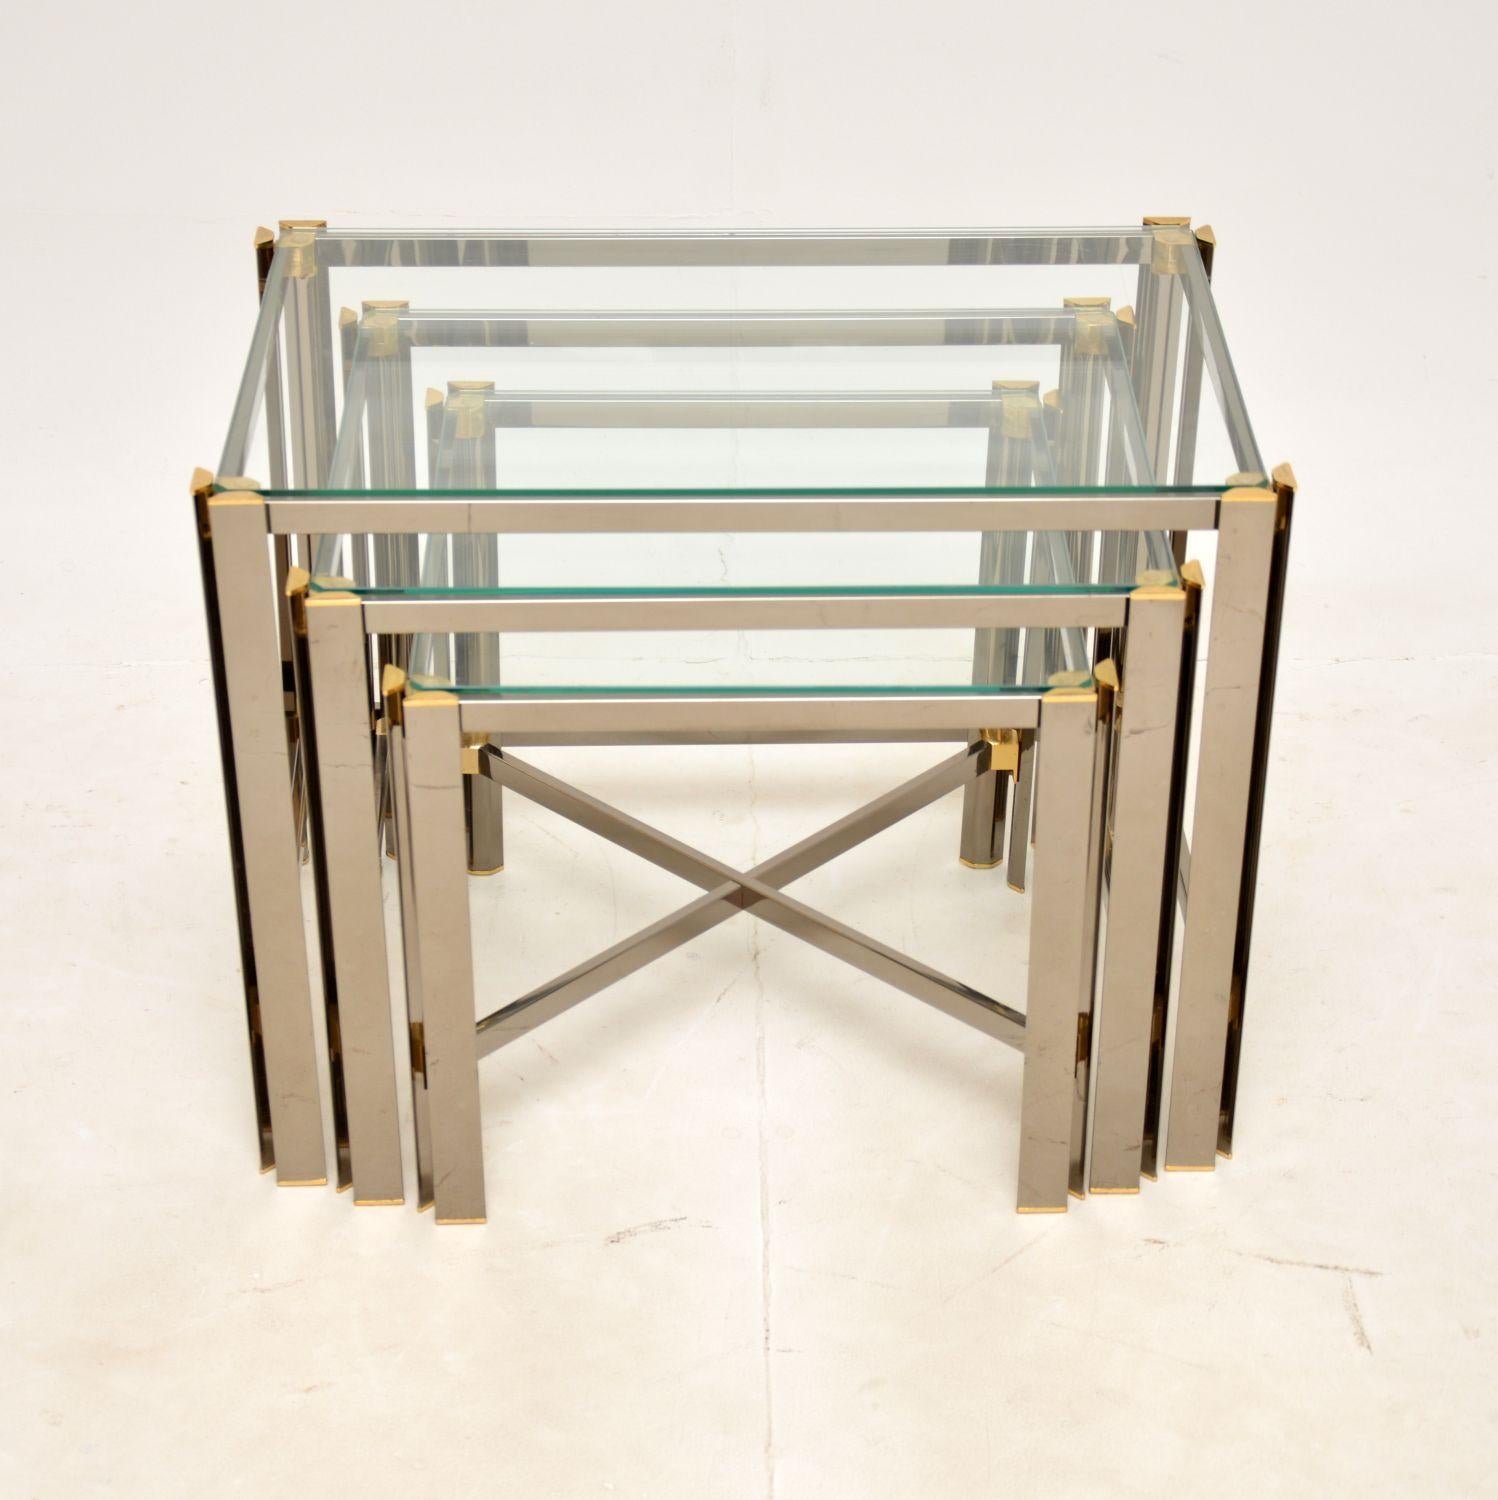 A very stylish and extremely well made vintage nest of tables in chrome and brass. They were made in Italy, and date from around the 1970s.

The quality is superb, they are beautifully made from chromed steel, with solid brass accents. They have